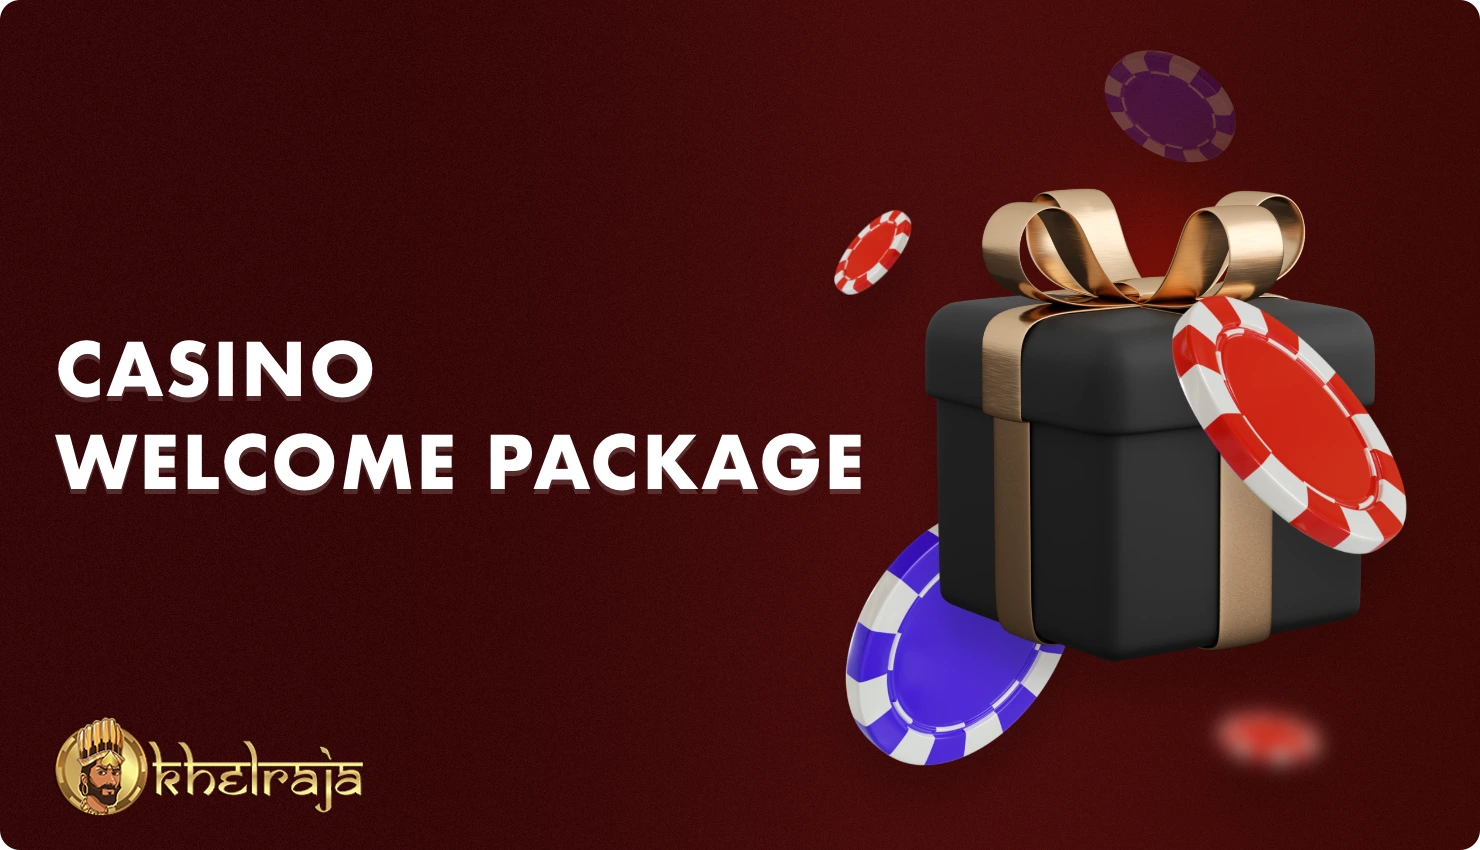 Khelraja casino welcome bonus is aimed at those who like to play at the casino